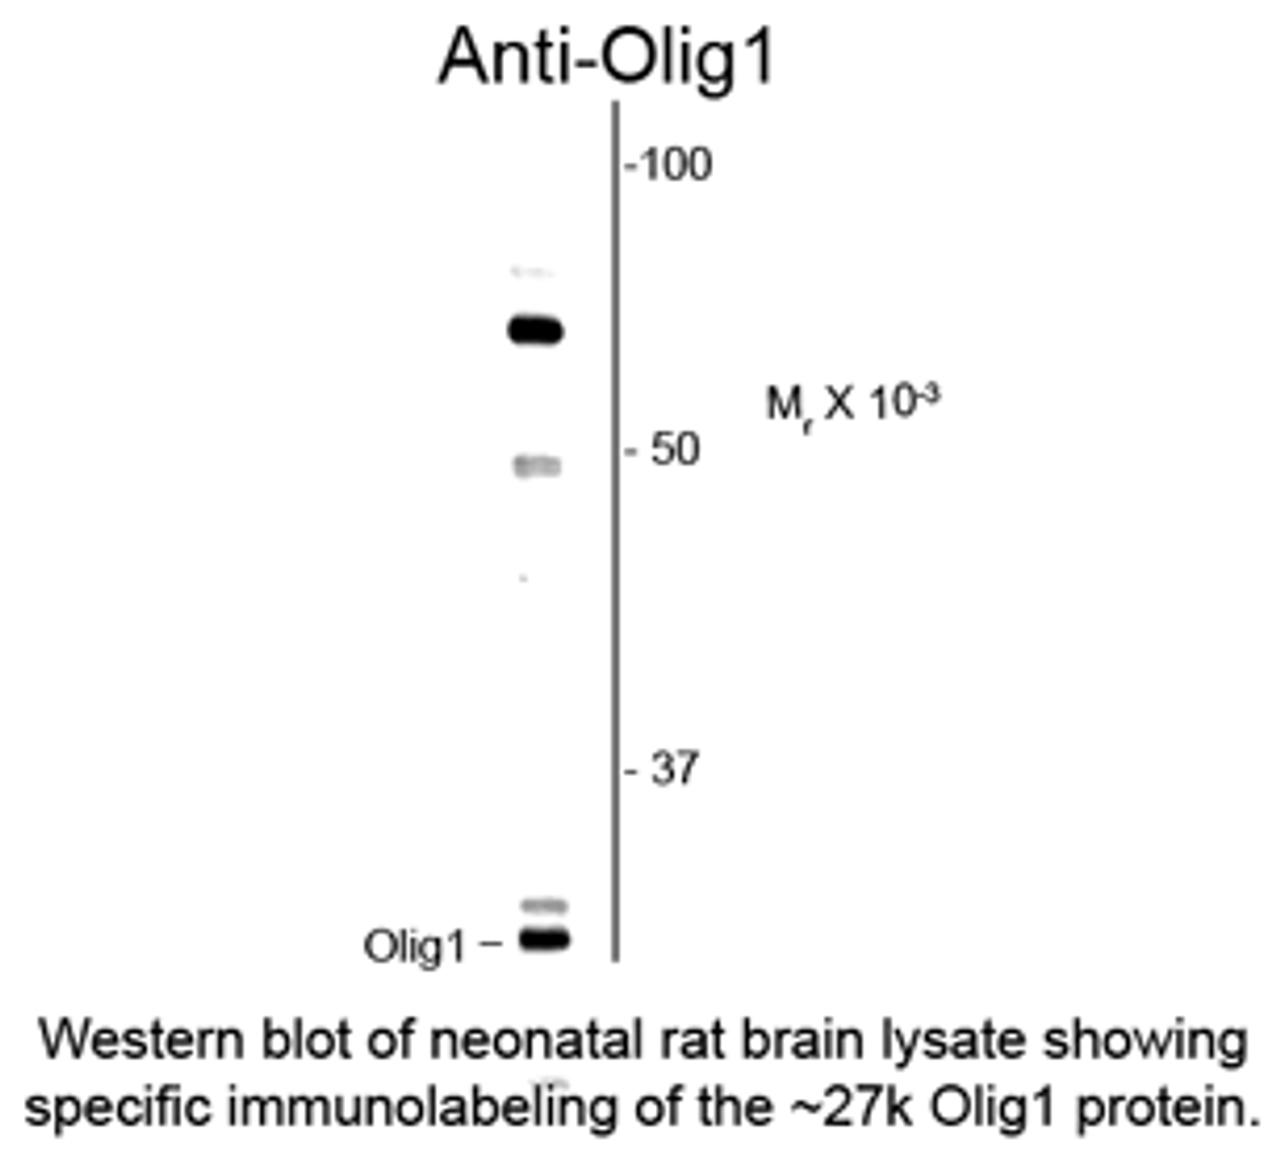 Western blot of neonatal rat brain lysate showing specific immunolabeling of the ~27k Olig1 protein.